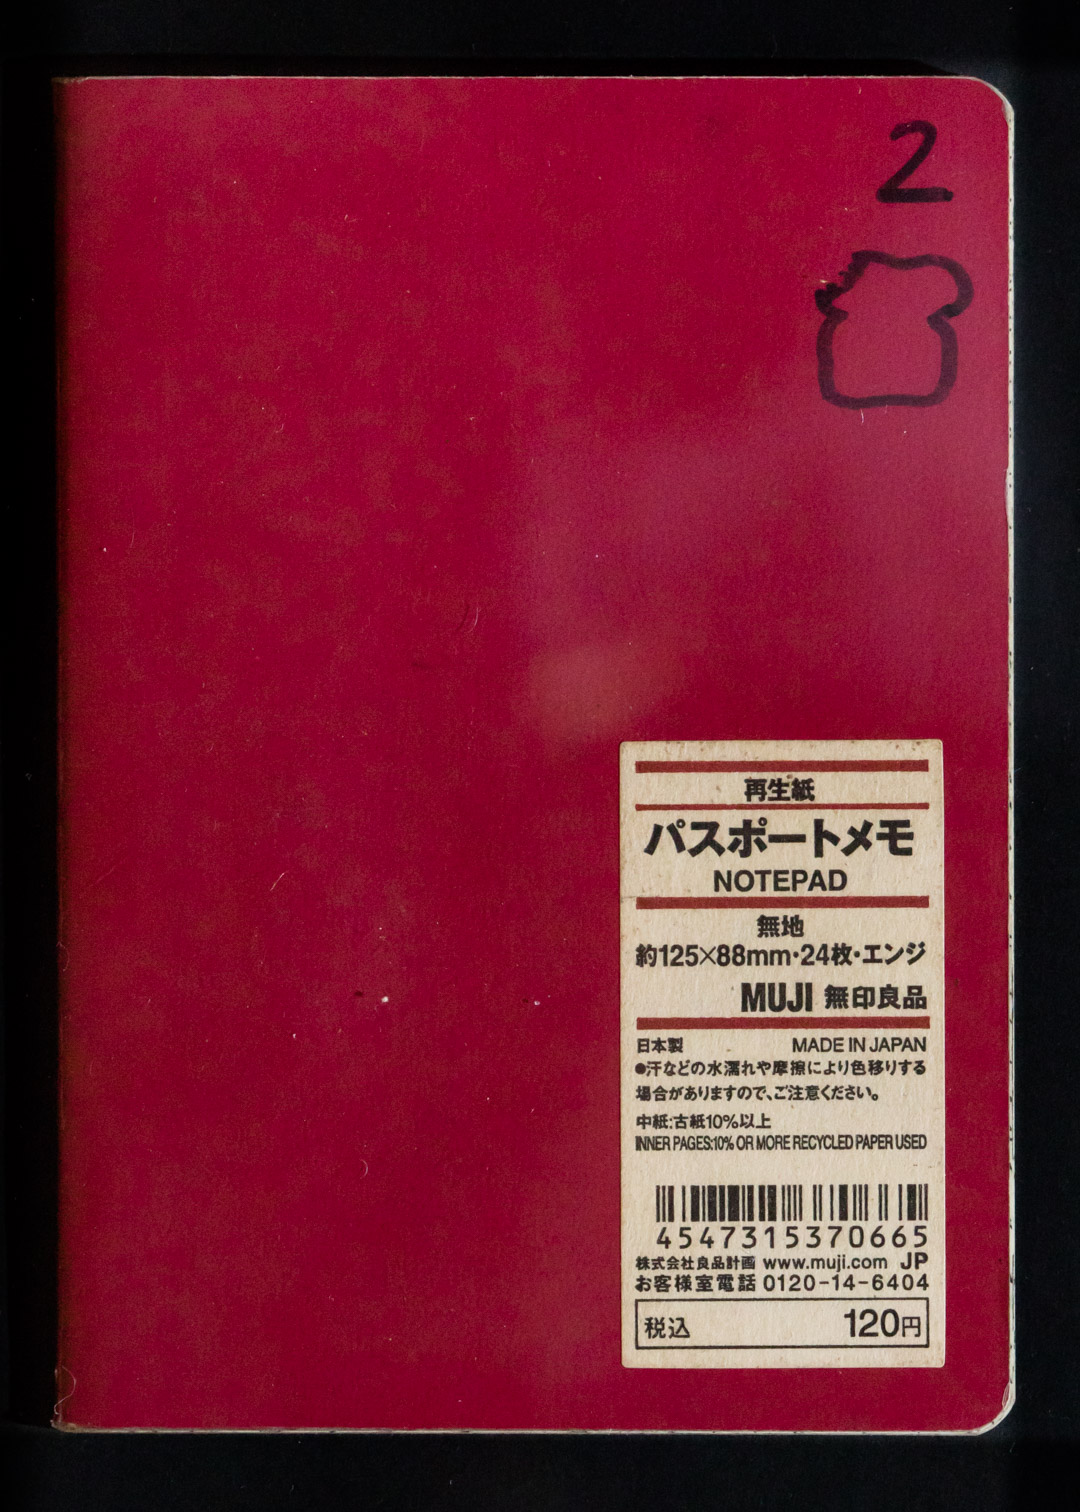 02-00 Front Cover.jpg